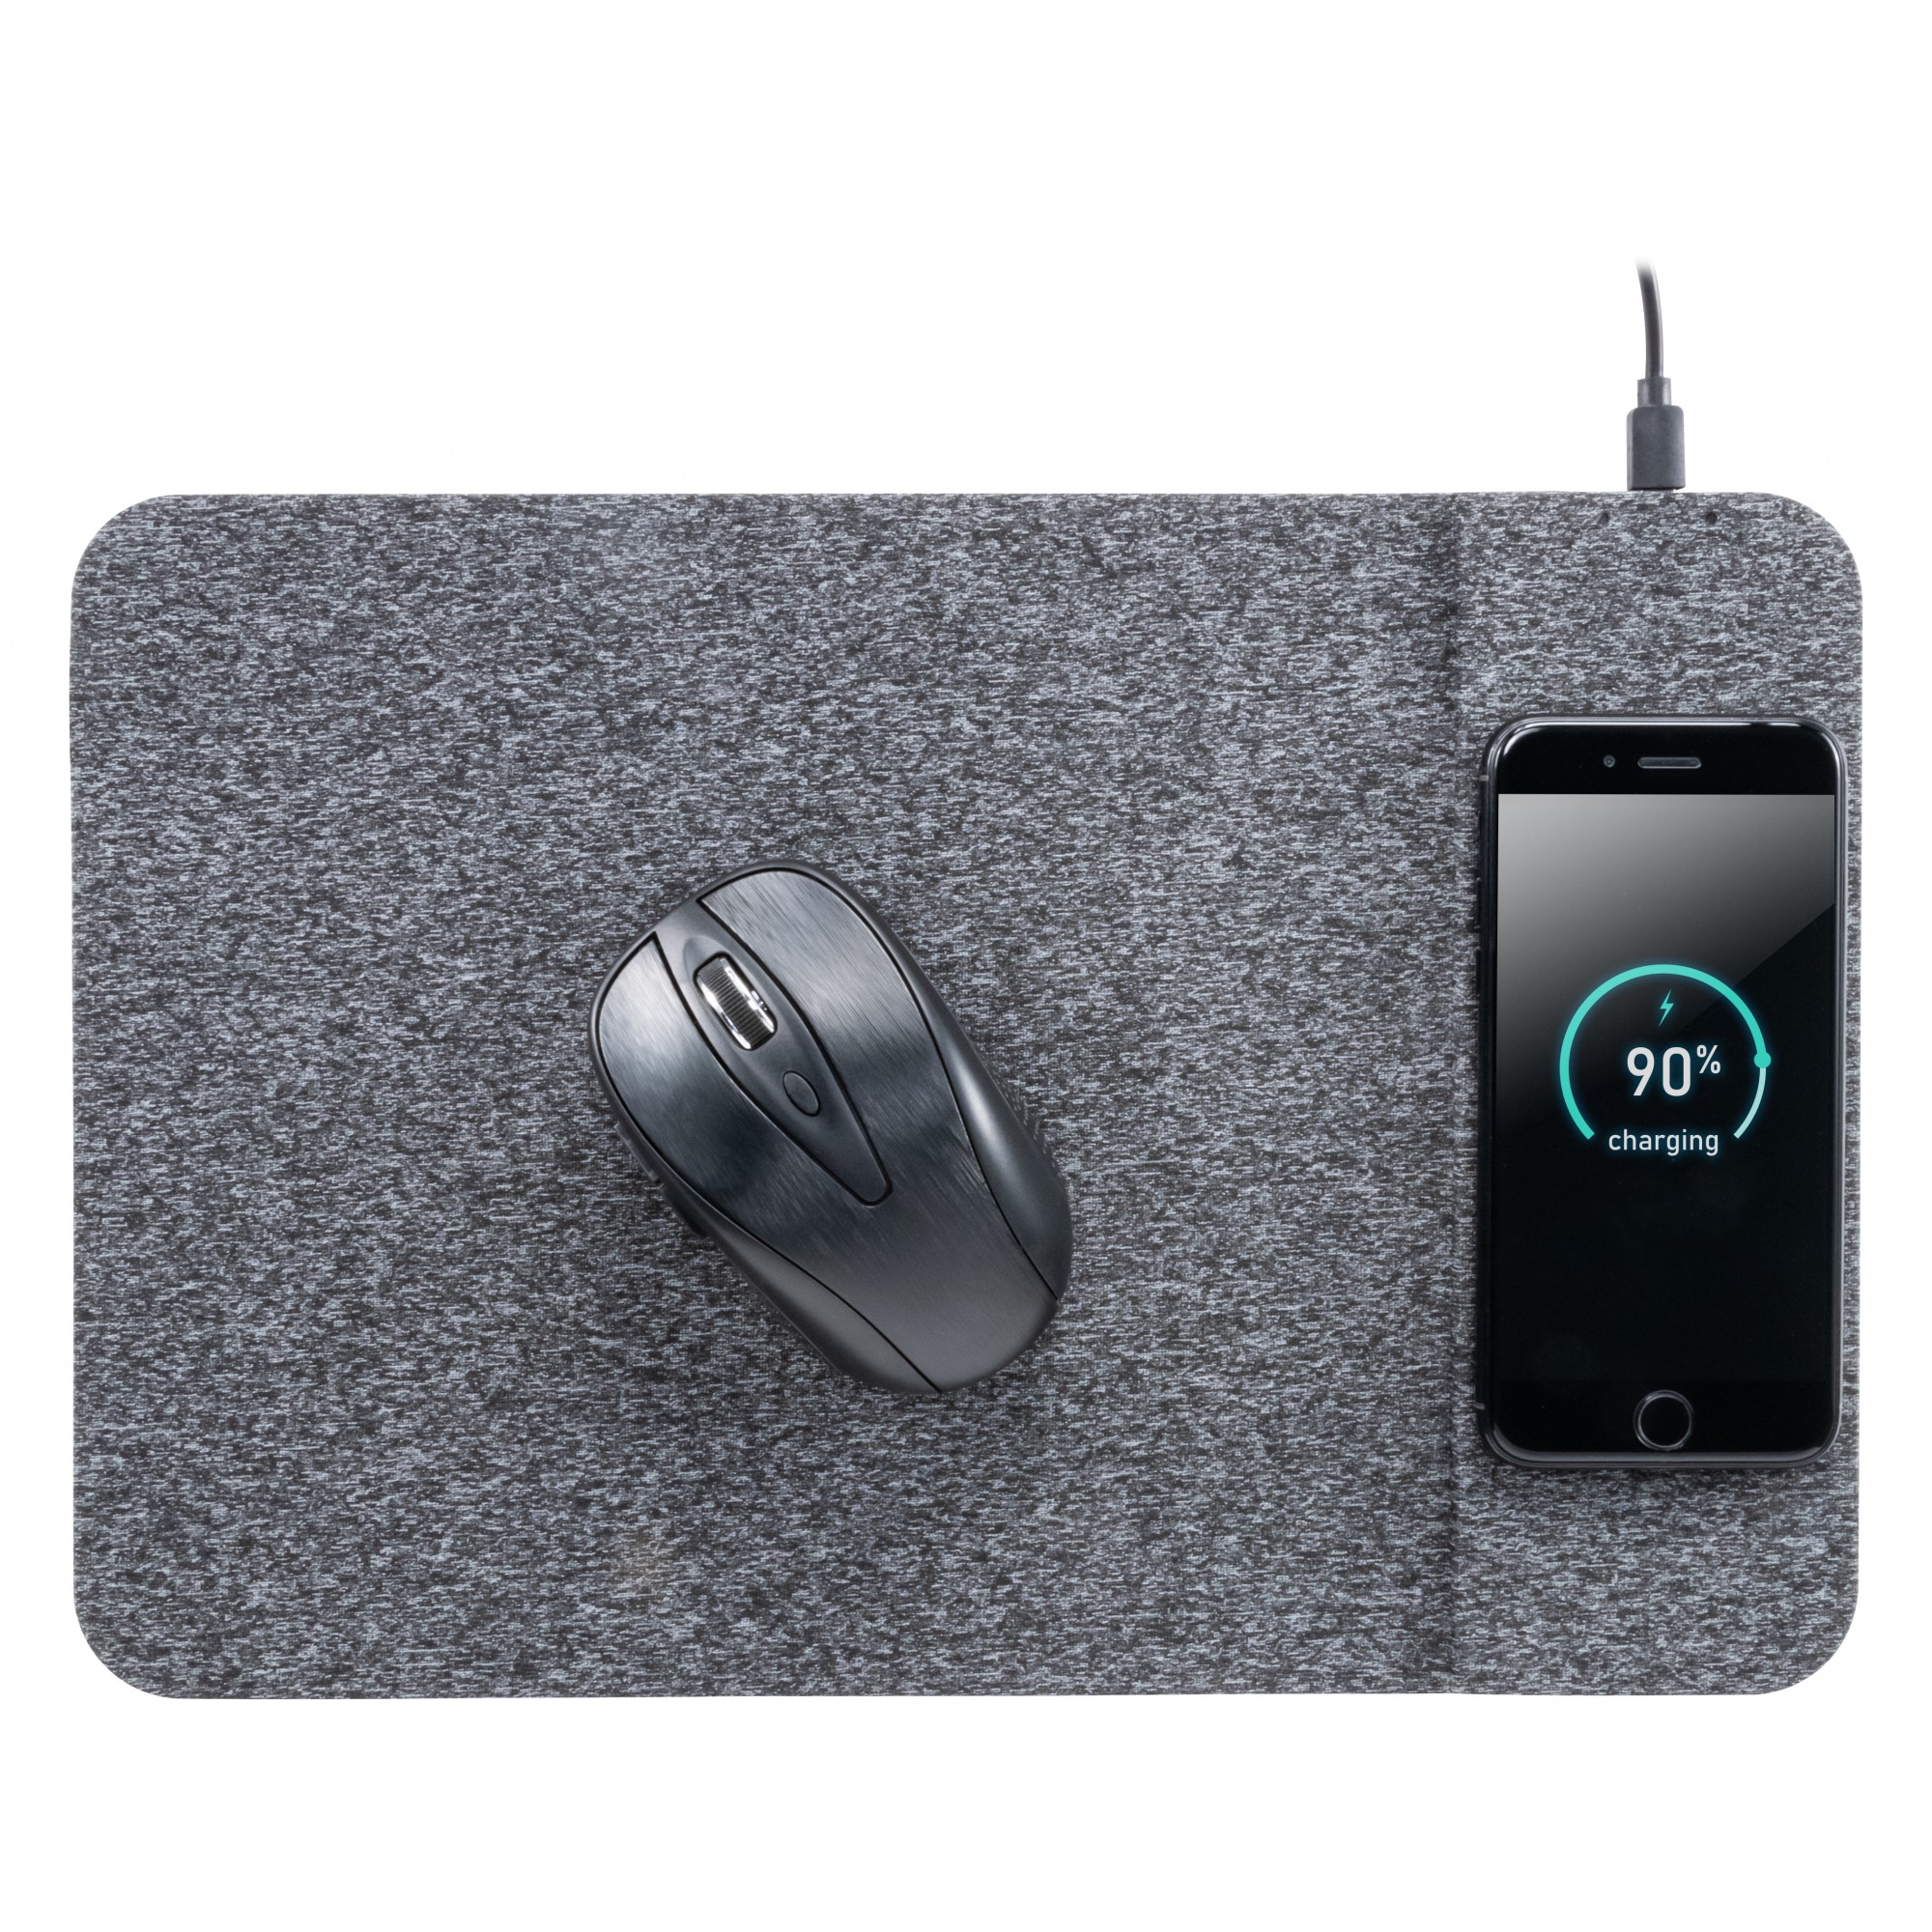 Hot Selling 2 in 1 Fast Wireless Charger Mouse Pad with Customized Fabric on The Surface for Computer Games and Office Study Use (MH-D85)